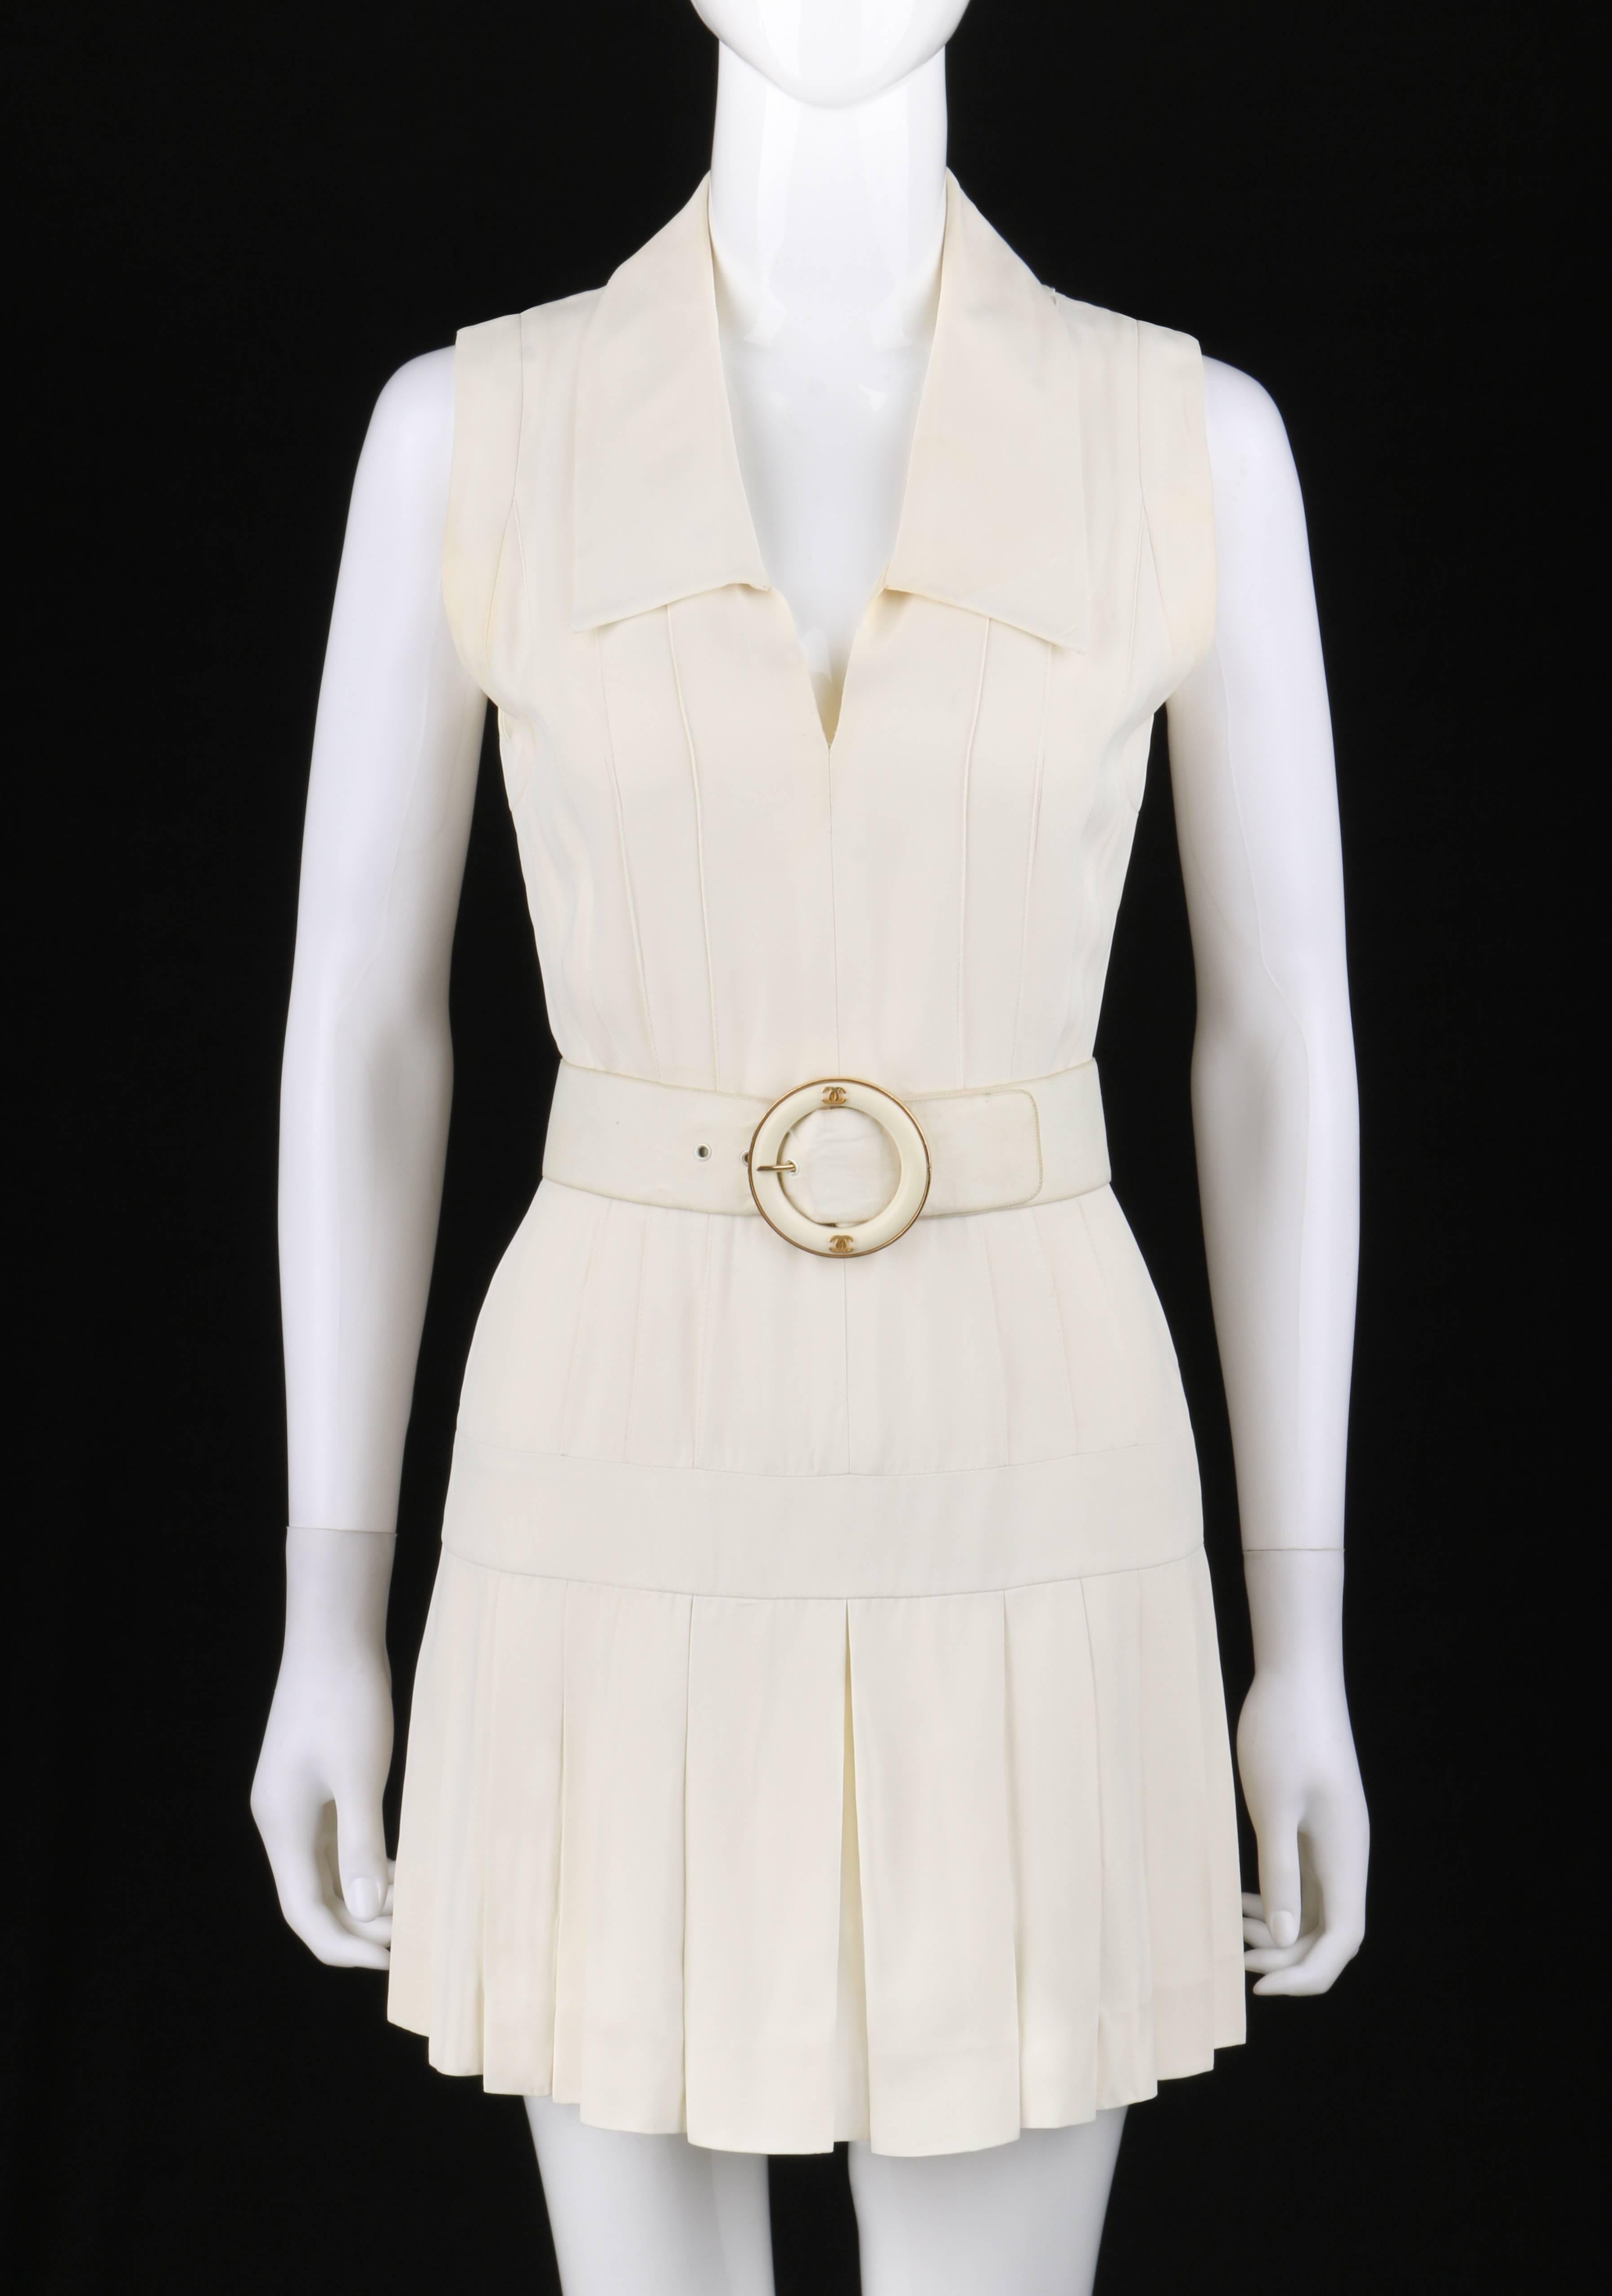 Vintage Chanel Boutique c.1980's winter white silk pleated drop waist dress with belt. Designed by Karl Lagerfeld. Chelesa collar. V-neckline. Sleeveless. Banded drop waist. Pin tuck seam detail from shoulders to drop waist at front and back.